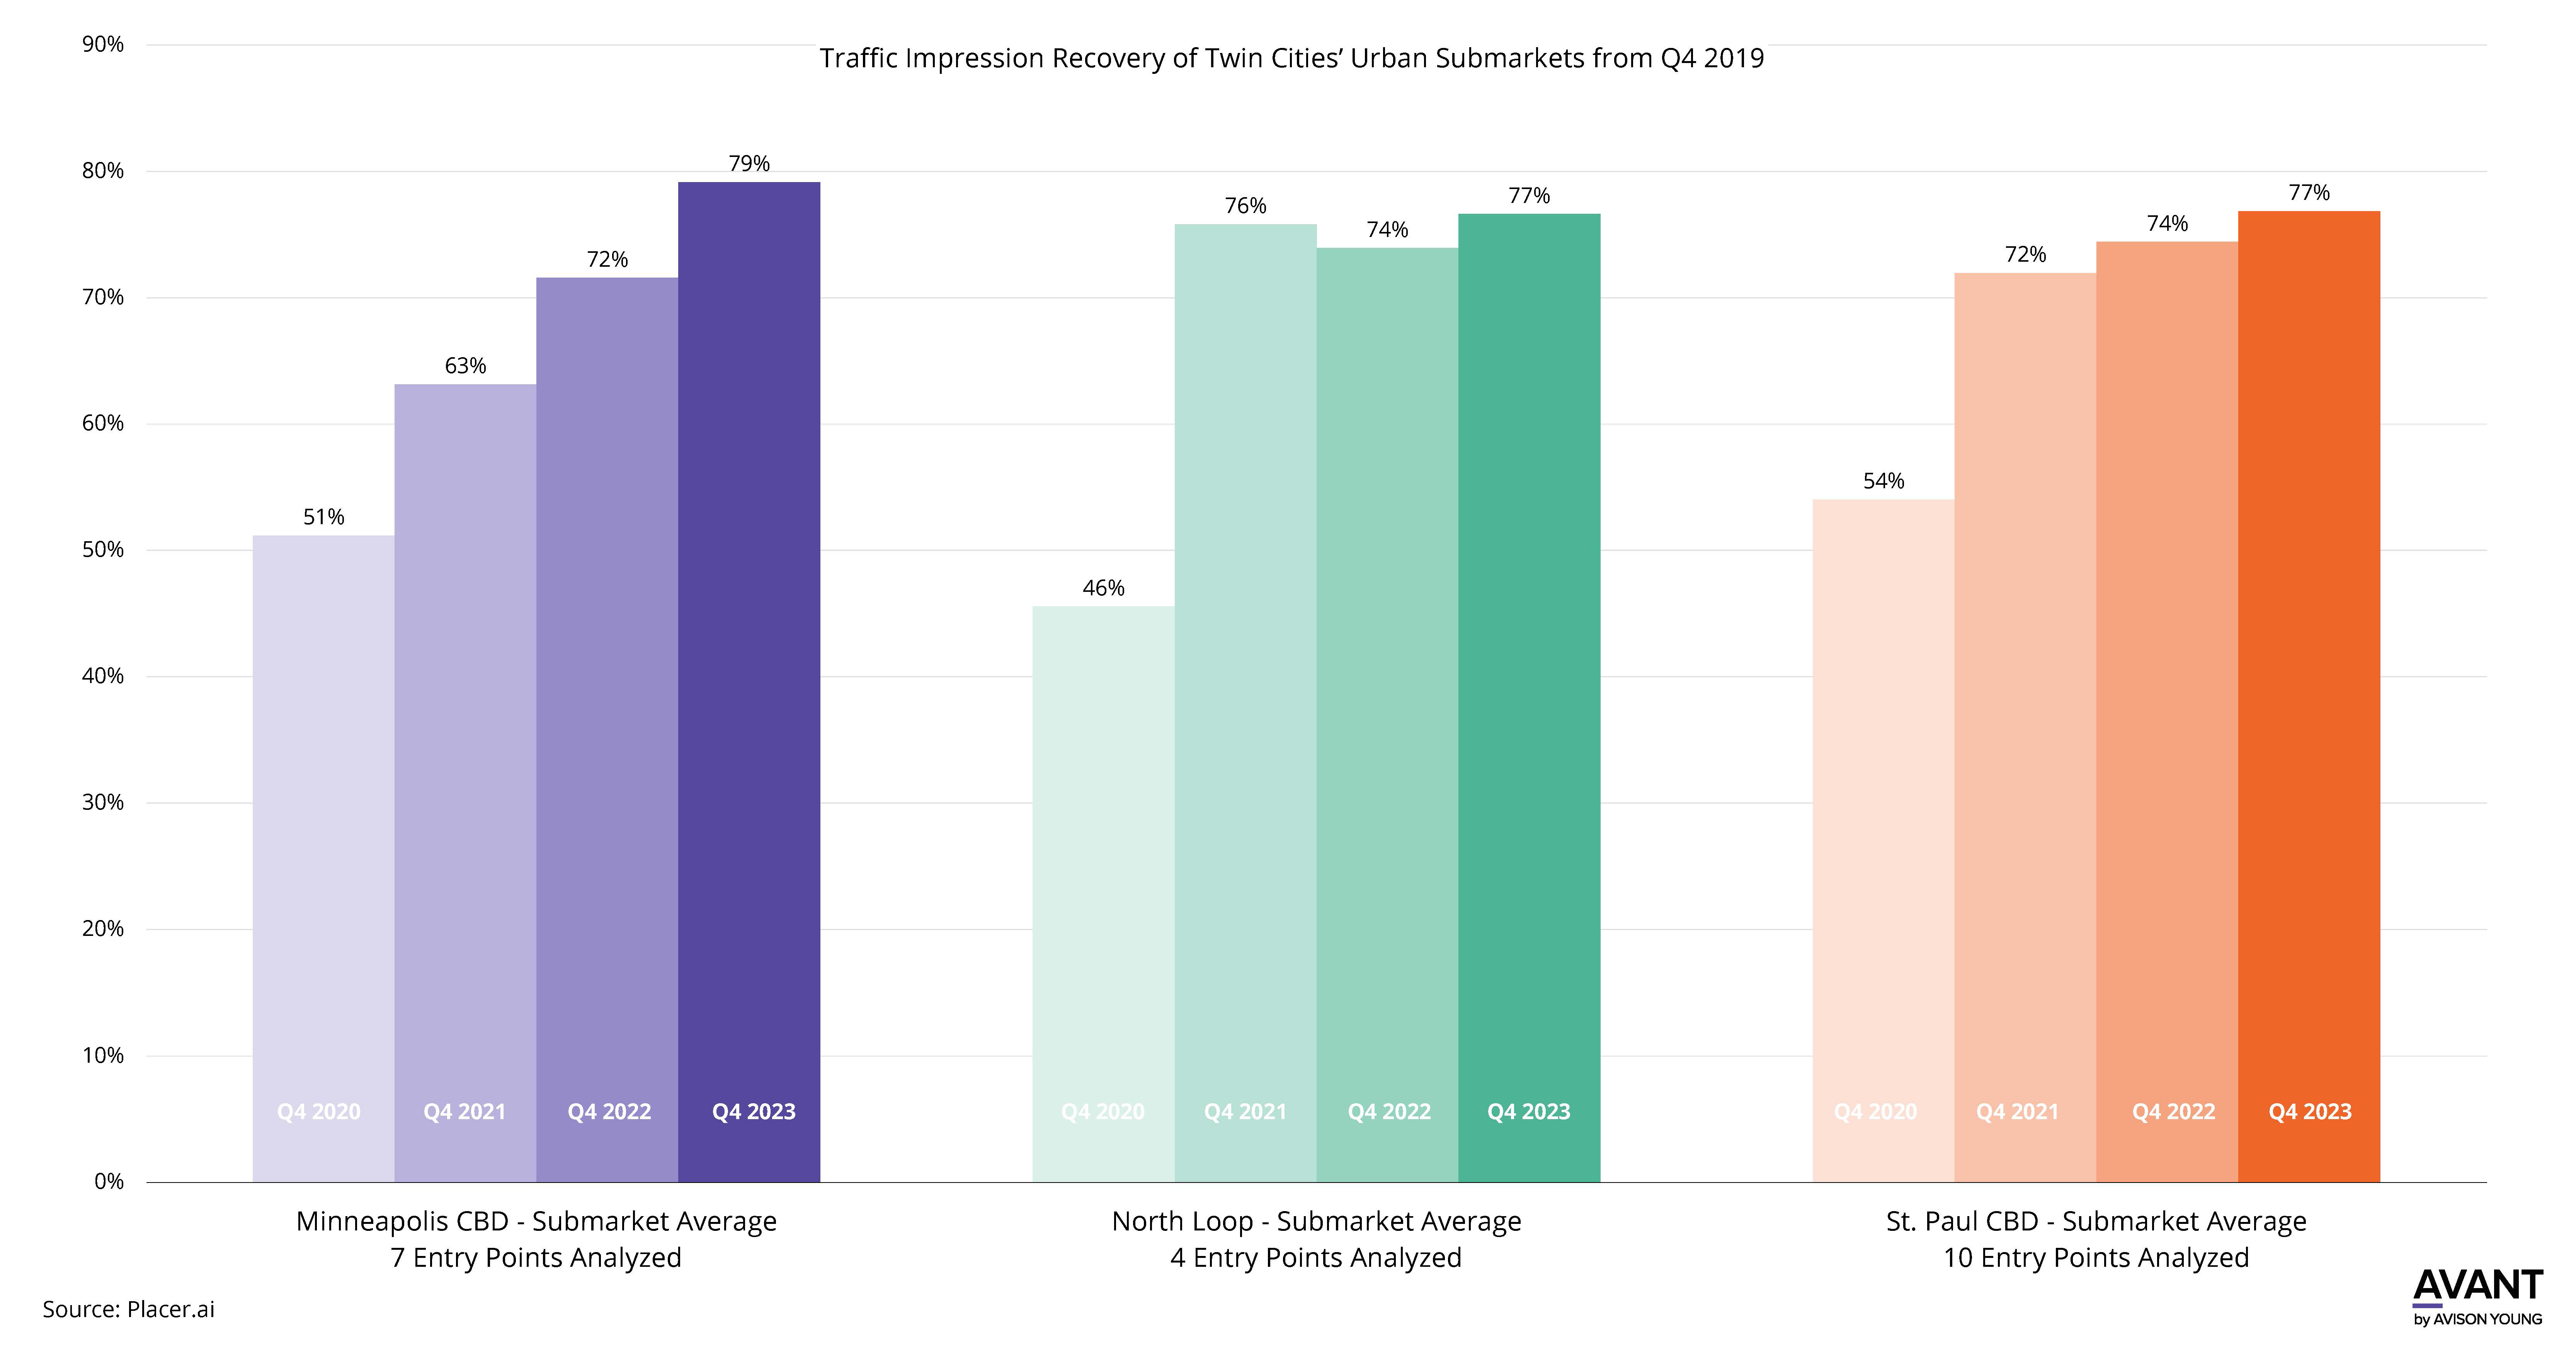 Chart shows traffic recovery across the Twin Cities and Urban Submarkets from 2019 to 2023